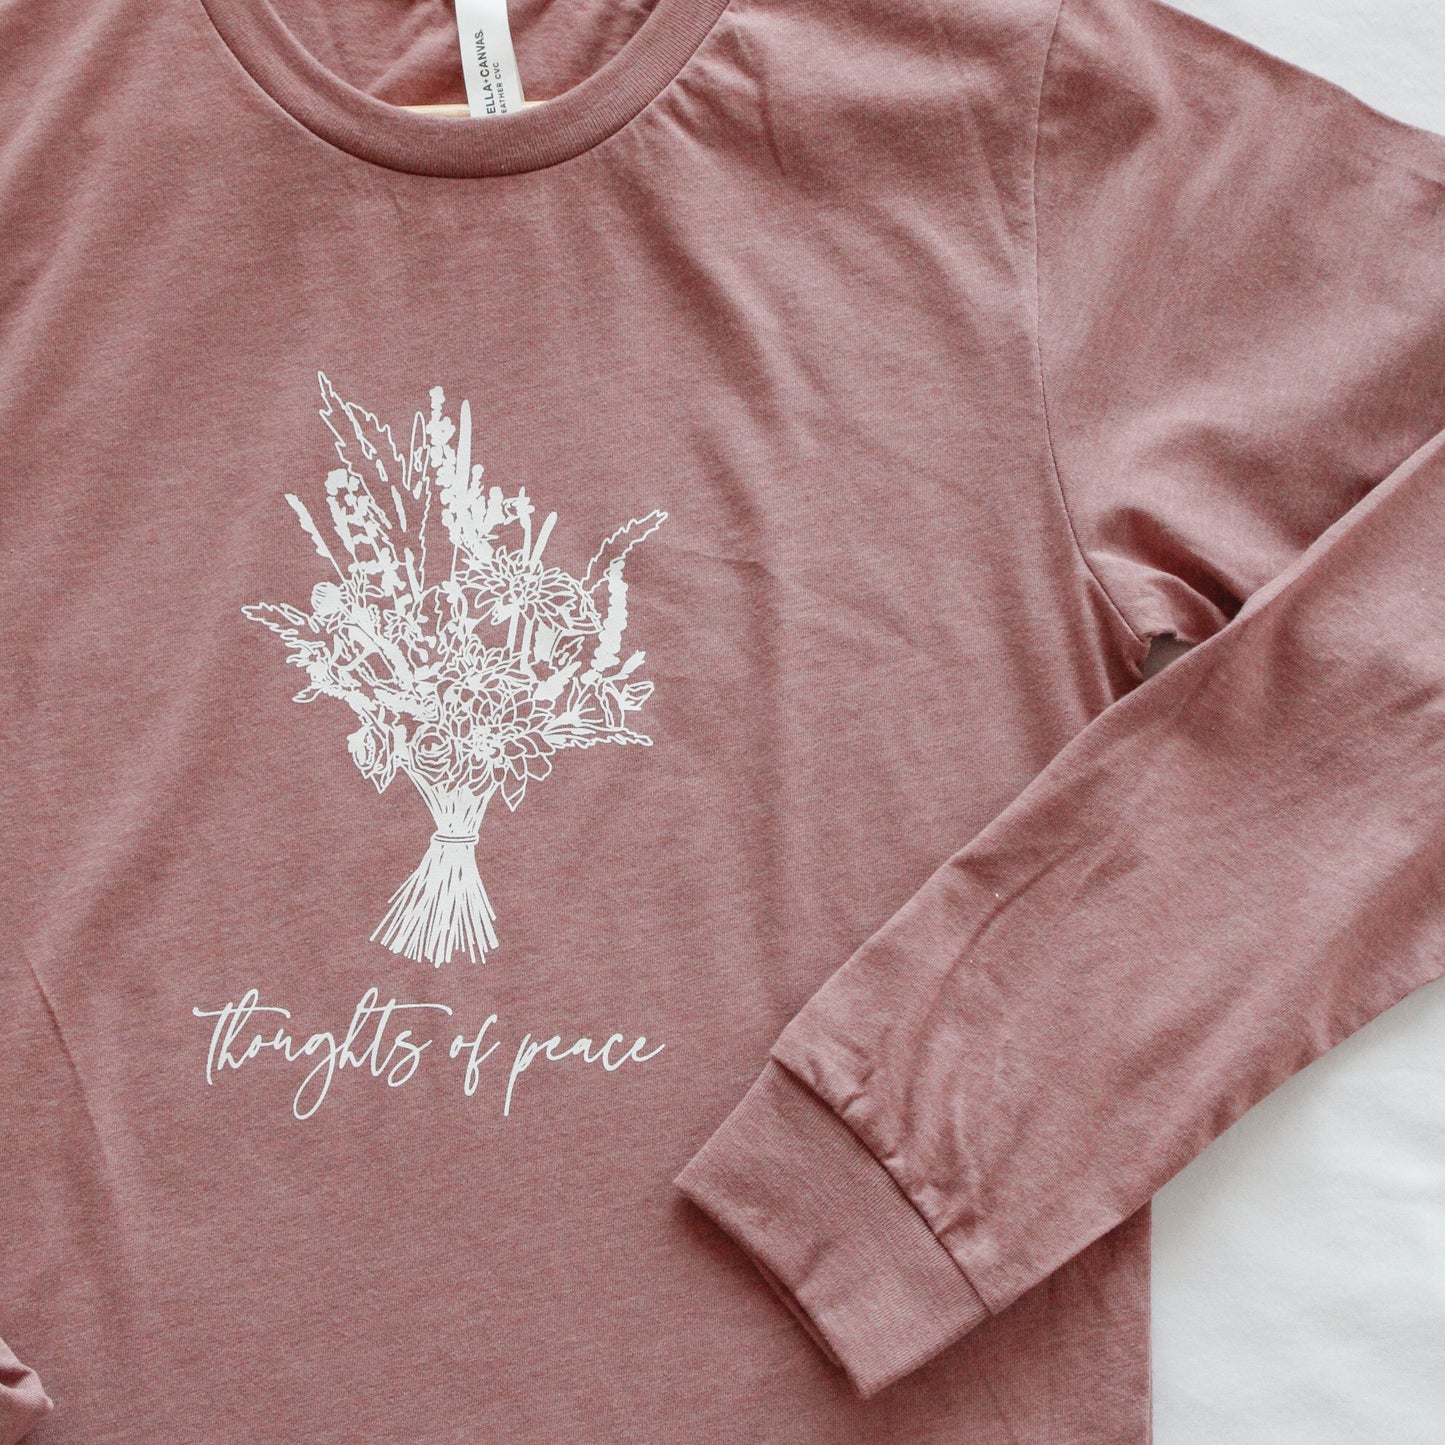 "Thoughts of Peace" Long-Sleeve T-Shirt (Color: Heathered Mauve)